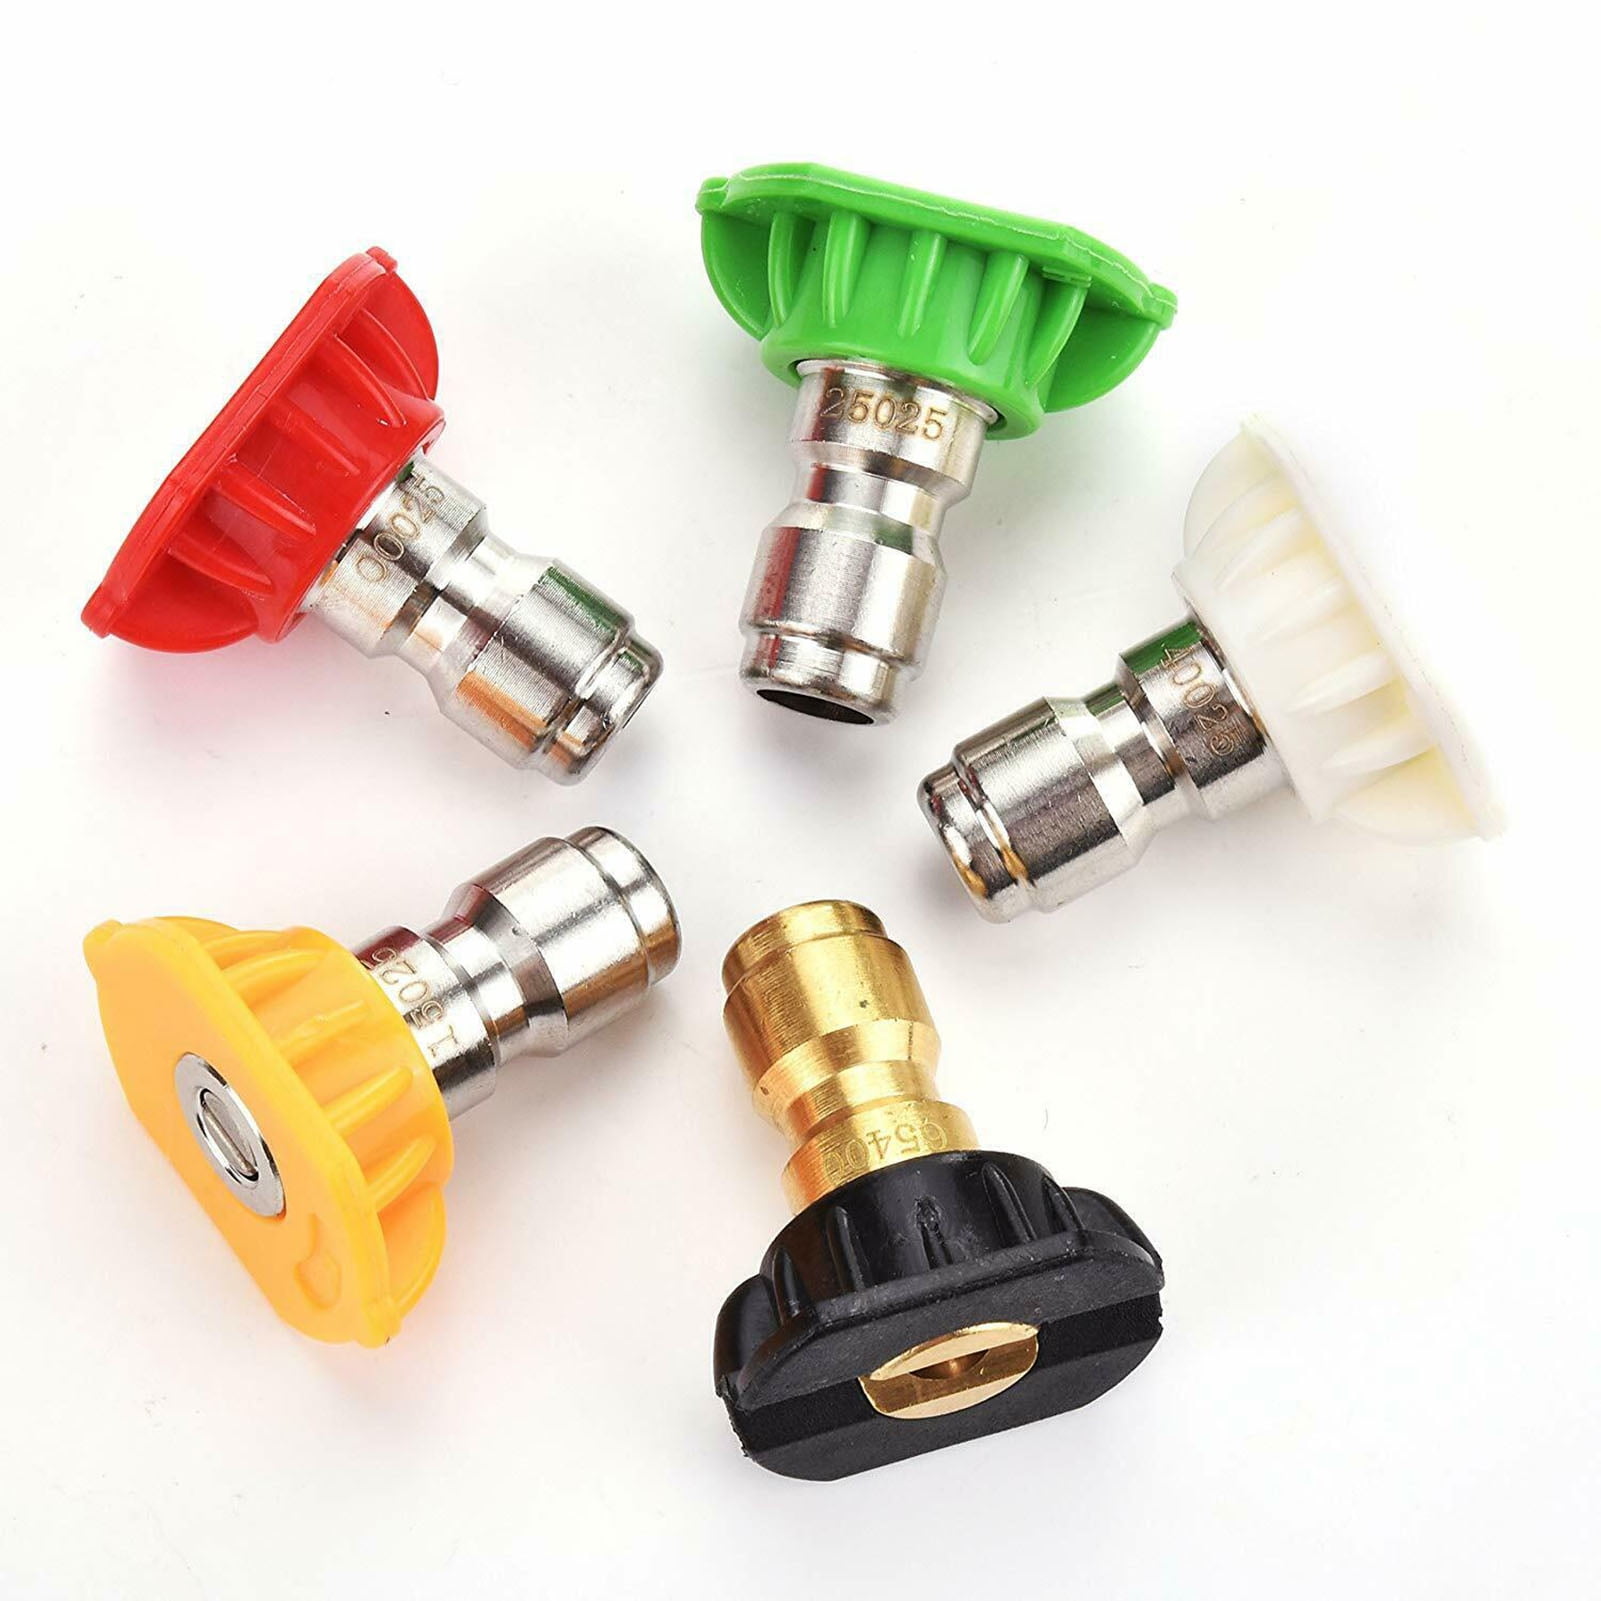 5pcs Pressure Washer Spray Tips Nozzles High Power Kit Quick Connect 1/4" Set